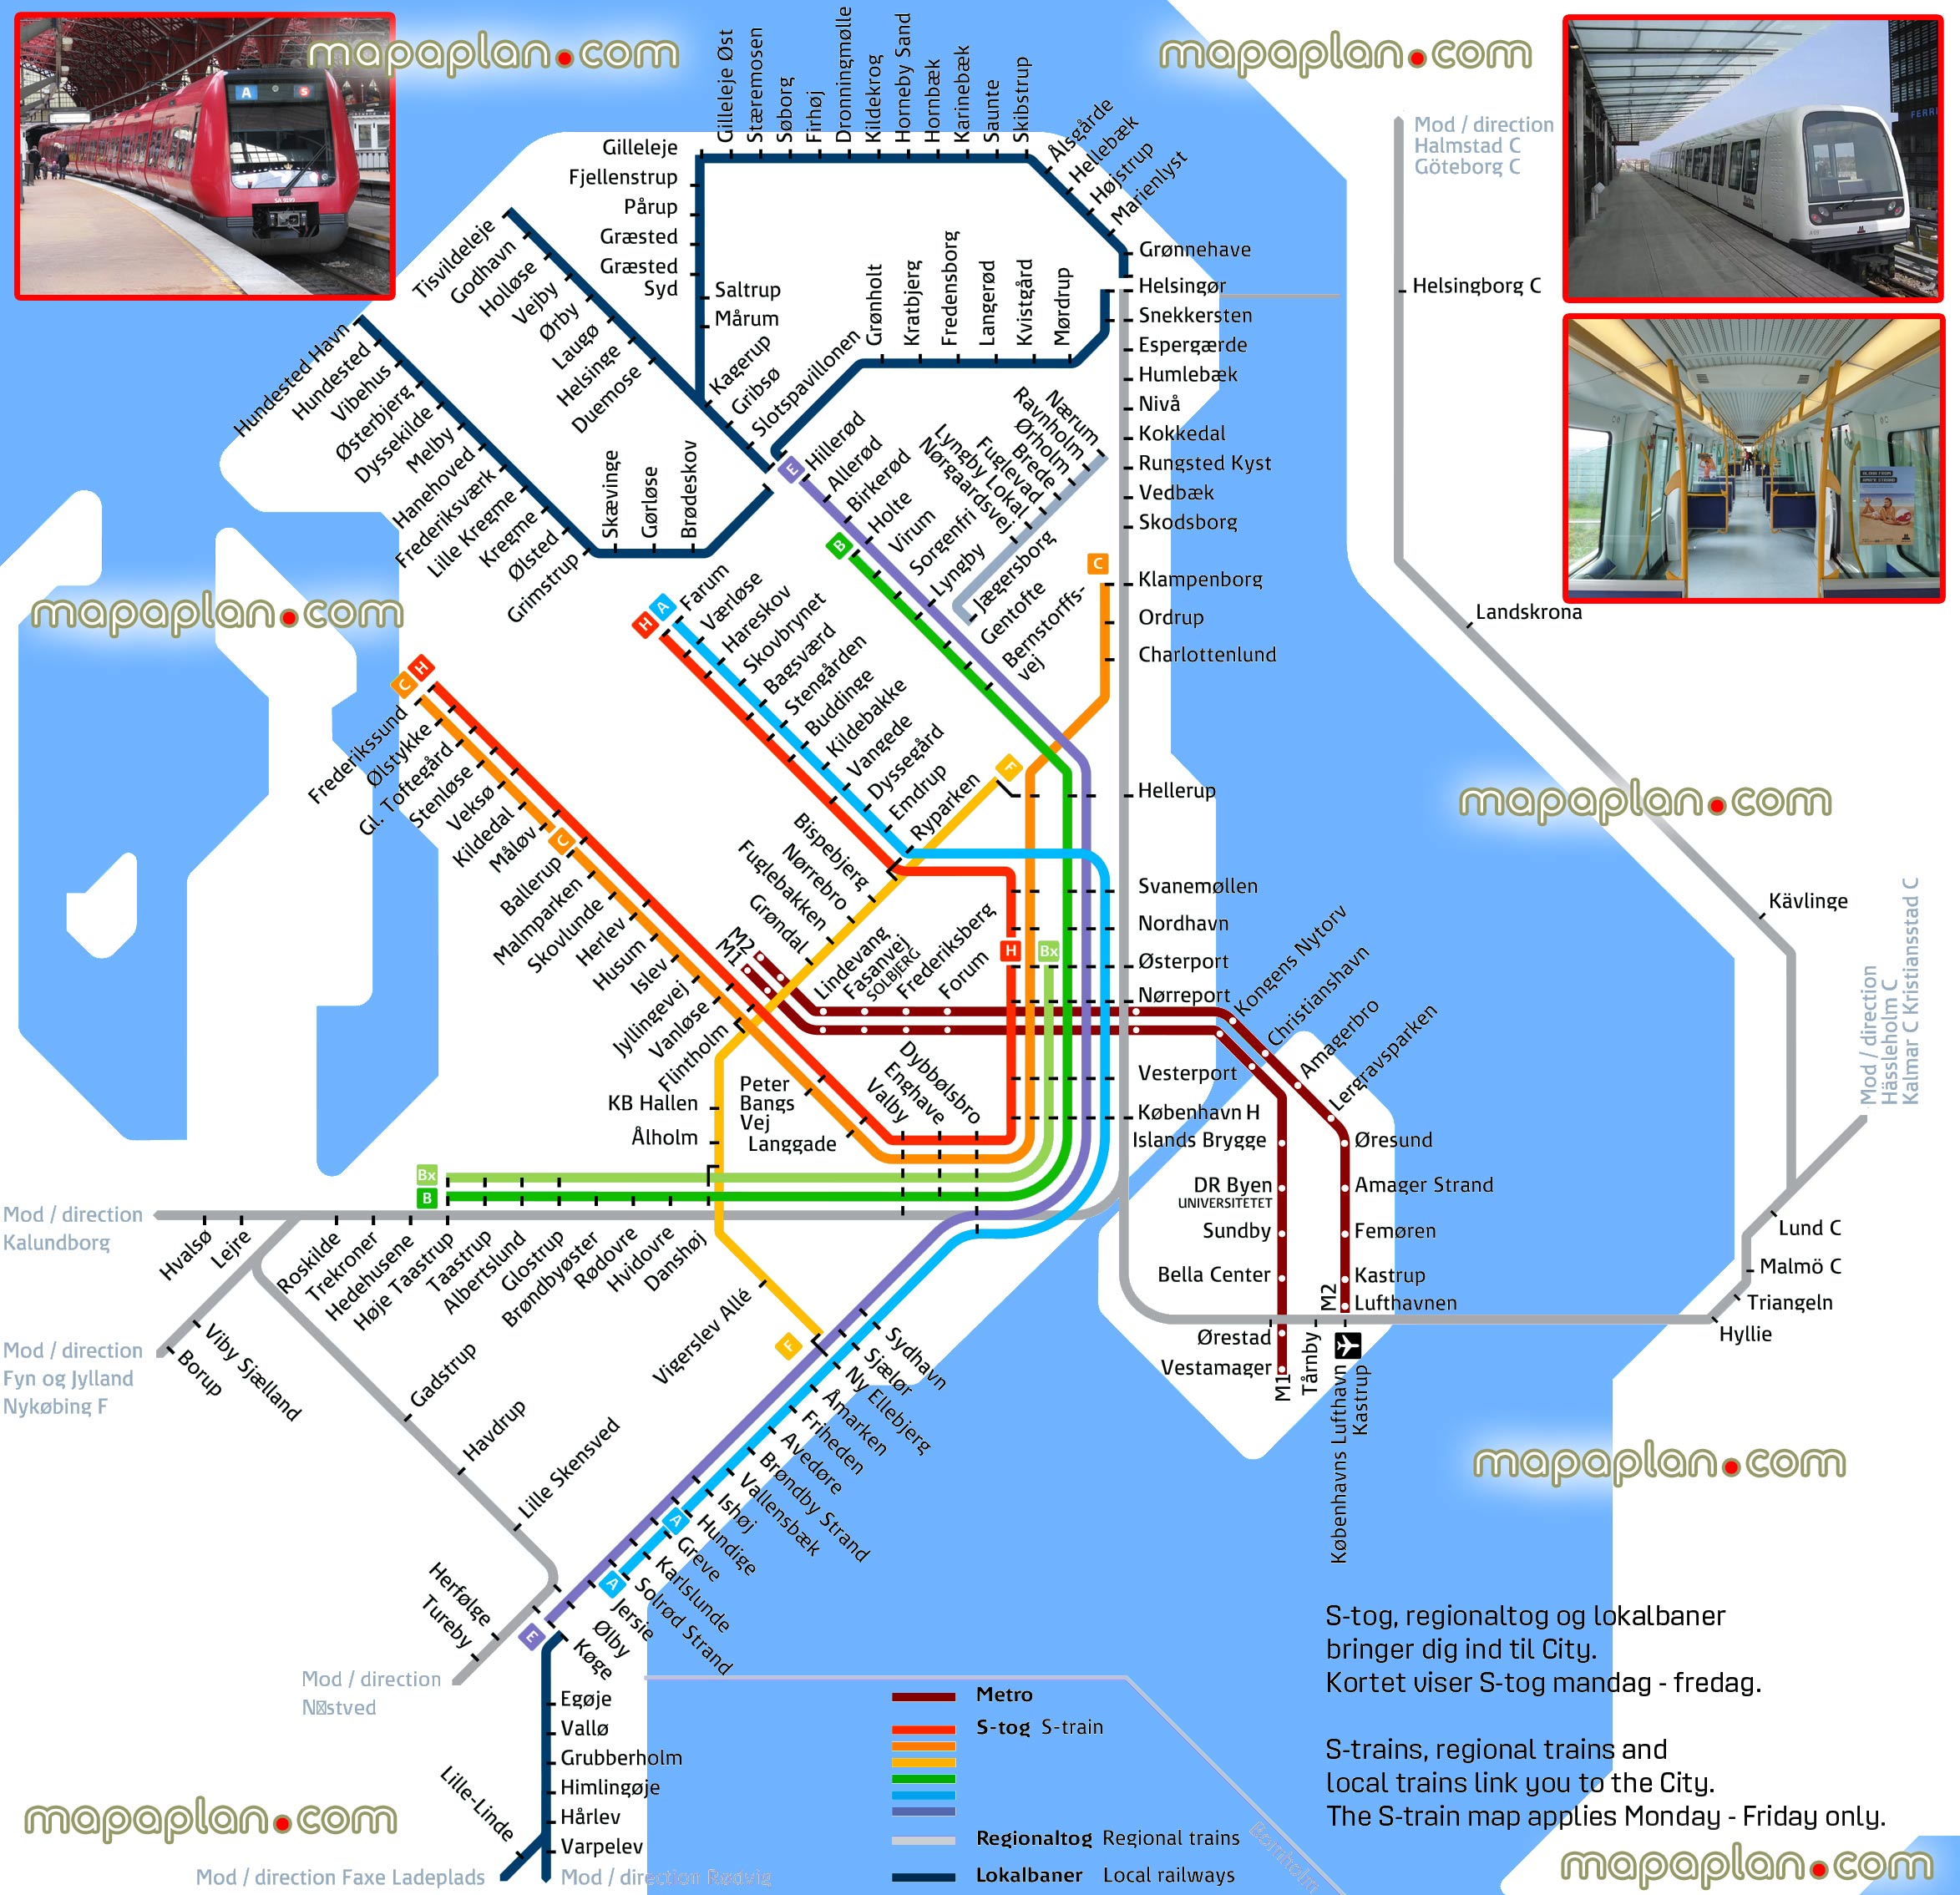 Copenhagen Map Copenhagen Metro Train S Tog Lines Stations Dsb Public Transport Rail System Transit Zones Diagram In English Updated Network Plan With Routes Stops Regional Local Railway Airport